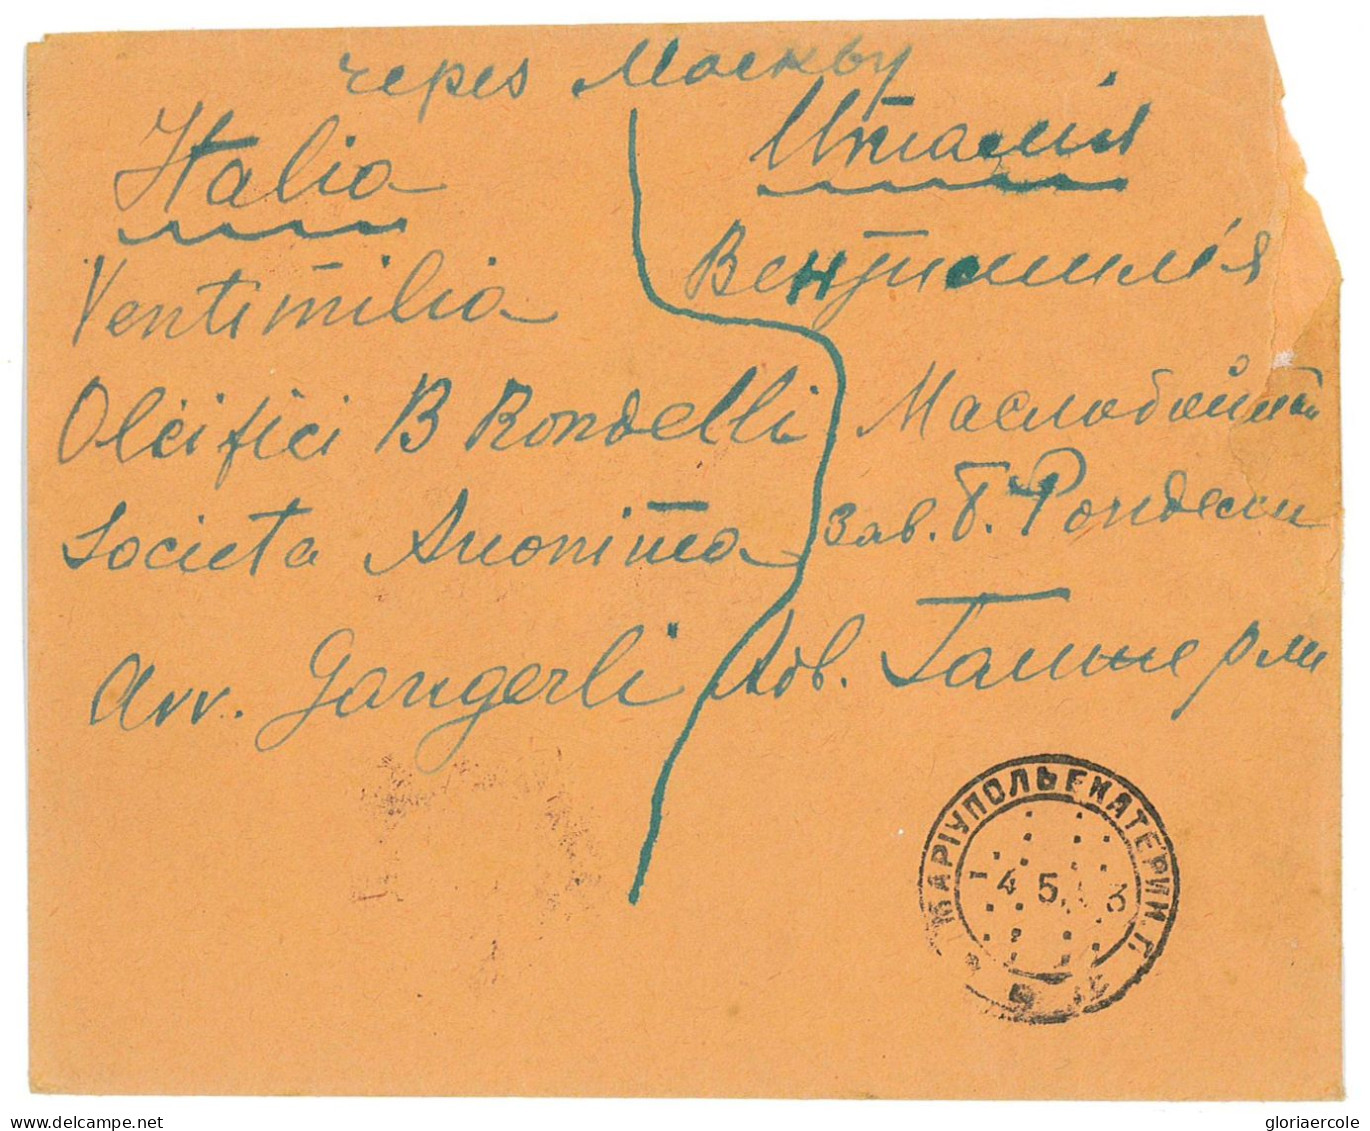 P2914 - RUSSIA , NICE FRESH COVER MIXED FRANKING. 650 RUBEL RATE TO ITALY - Lettres & Documents